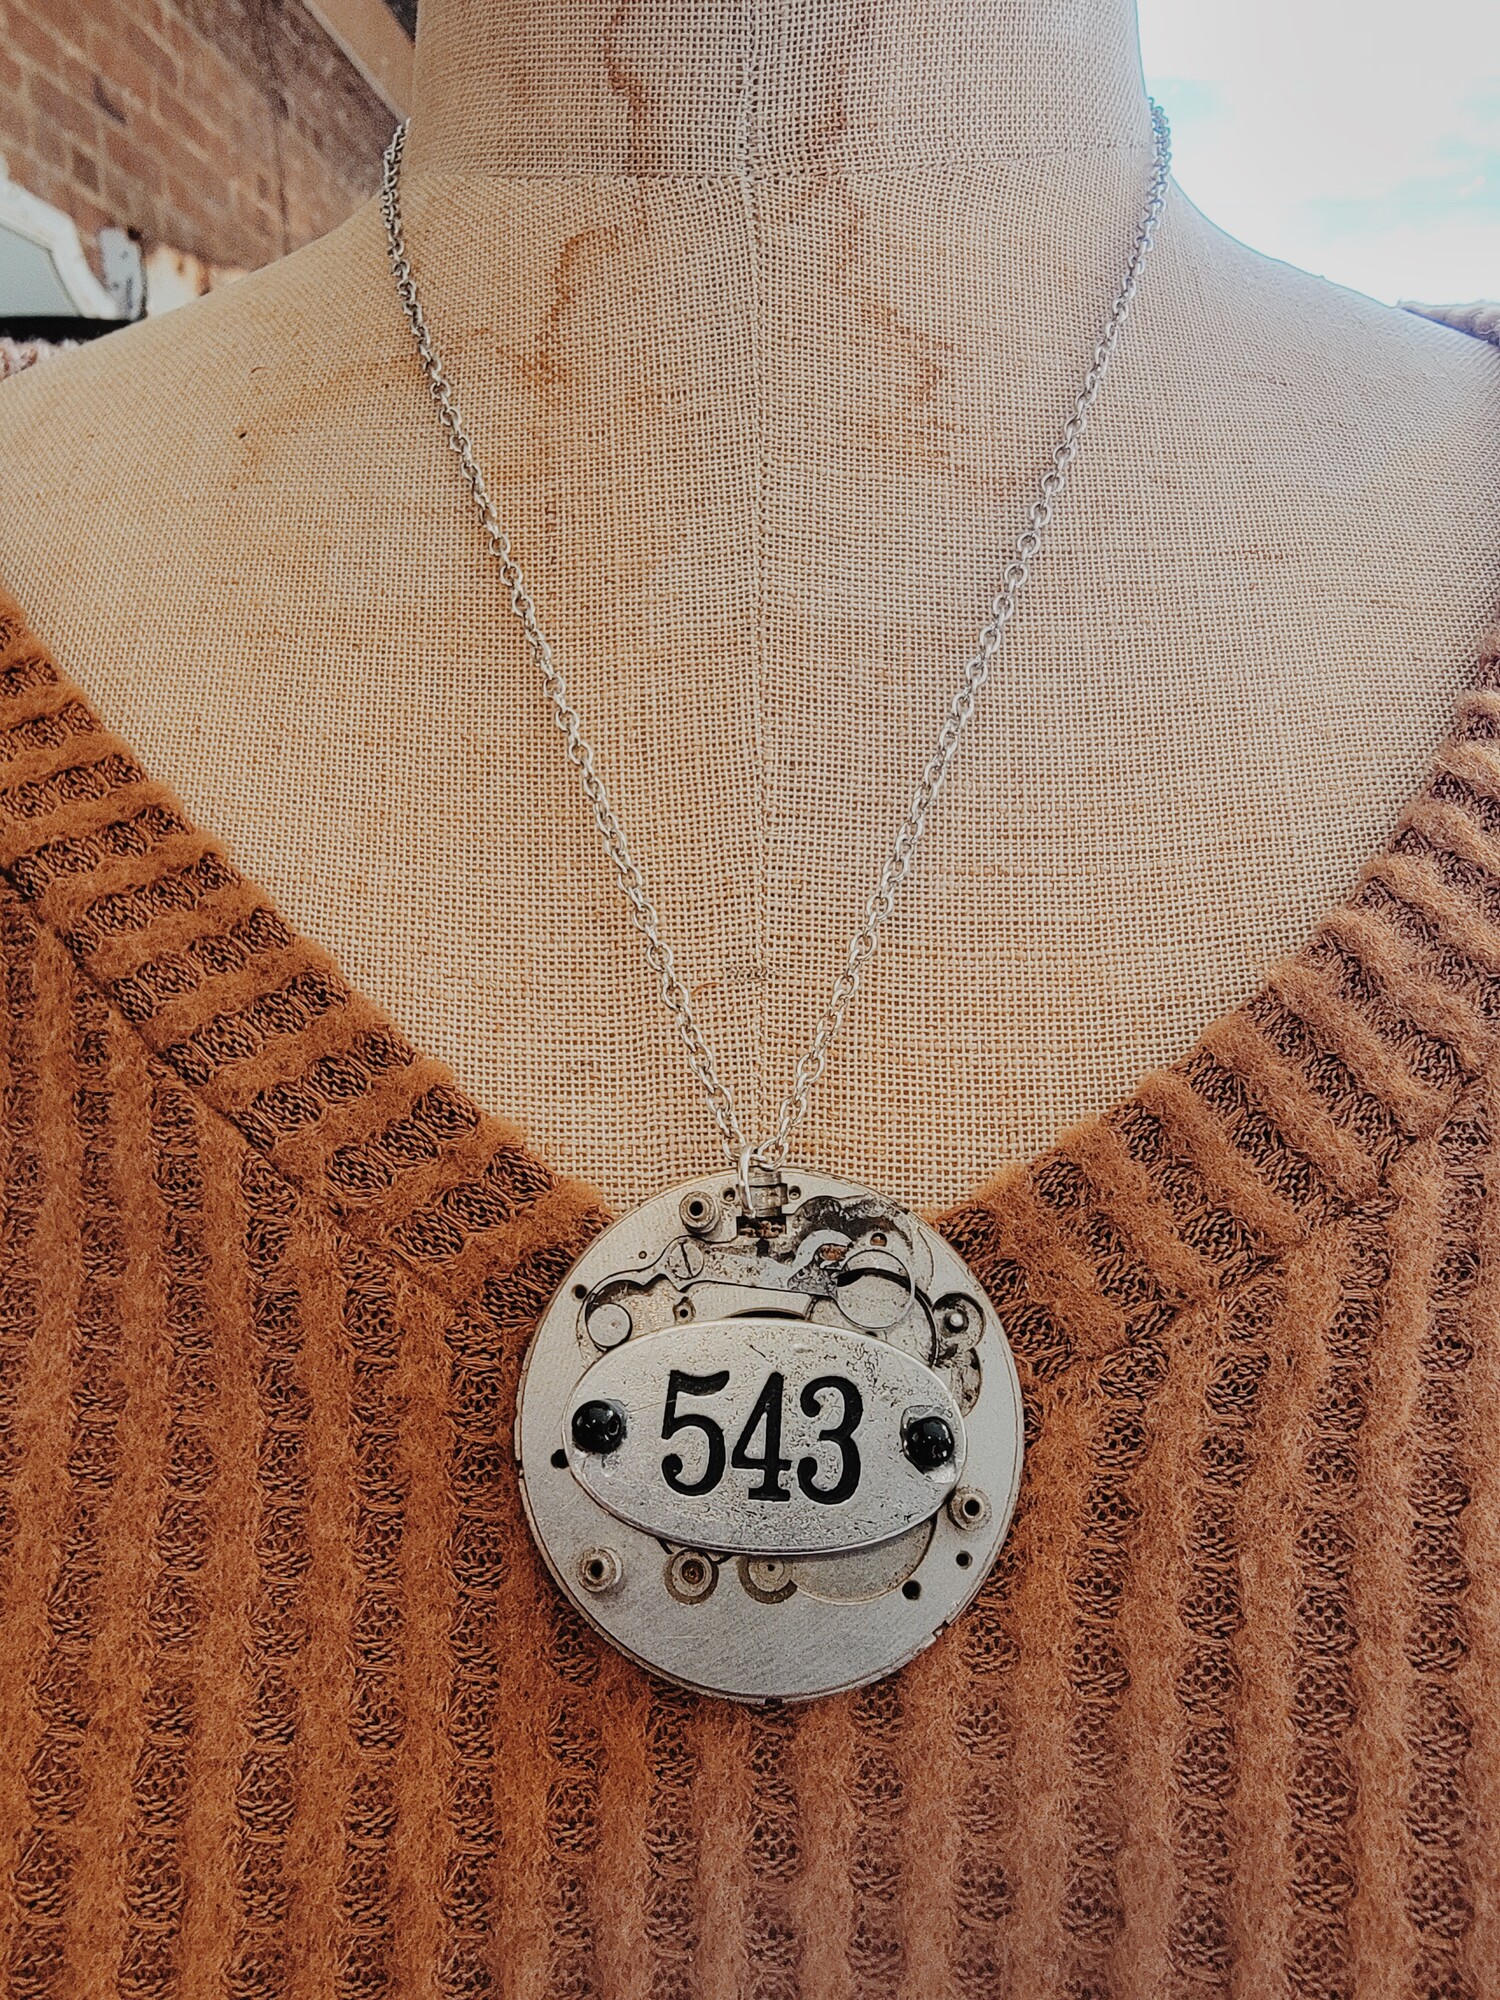 - Hand crafted necklace
- 22 Inch chain
- Clockwork pendant with 543 on the front